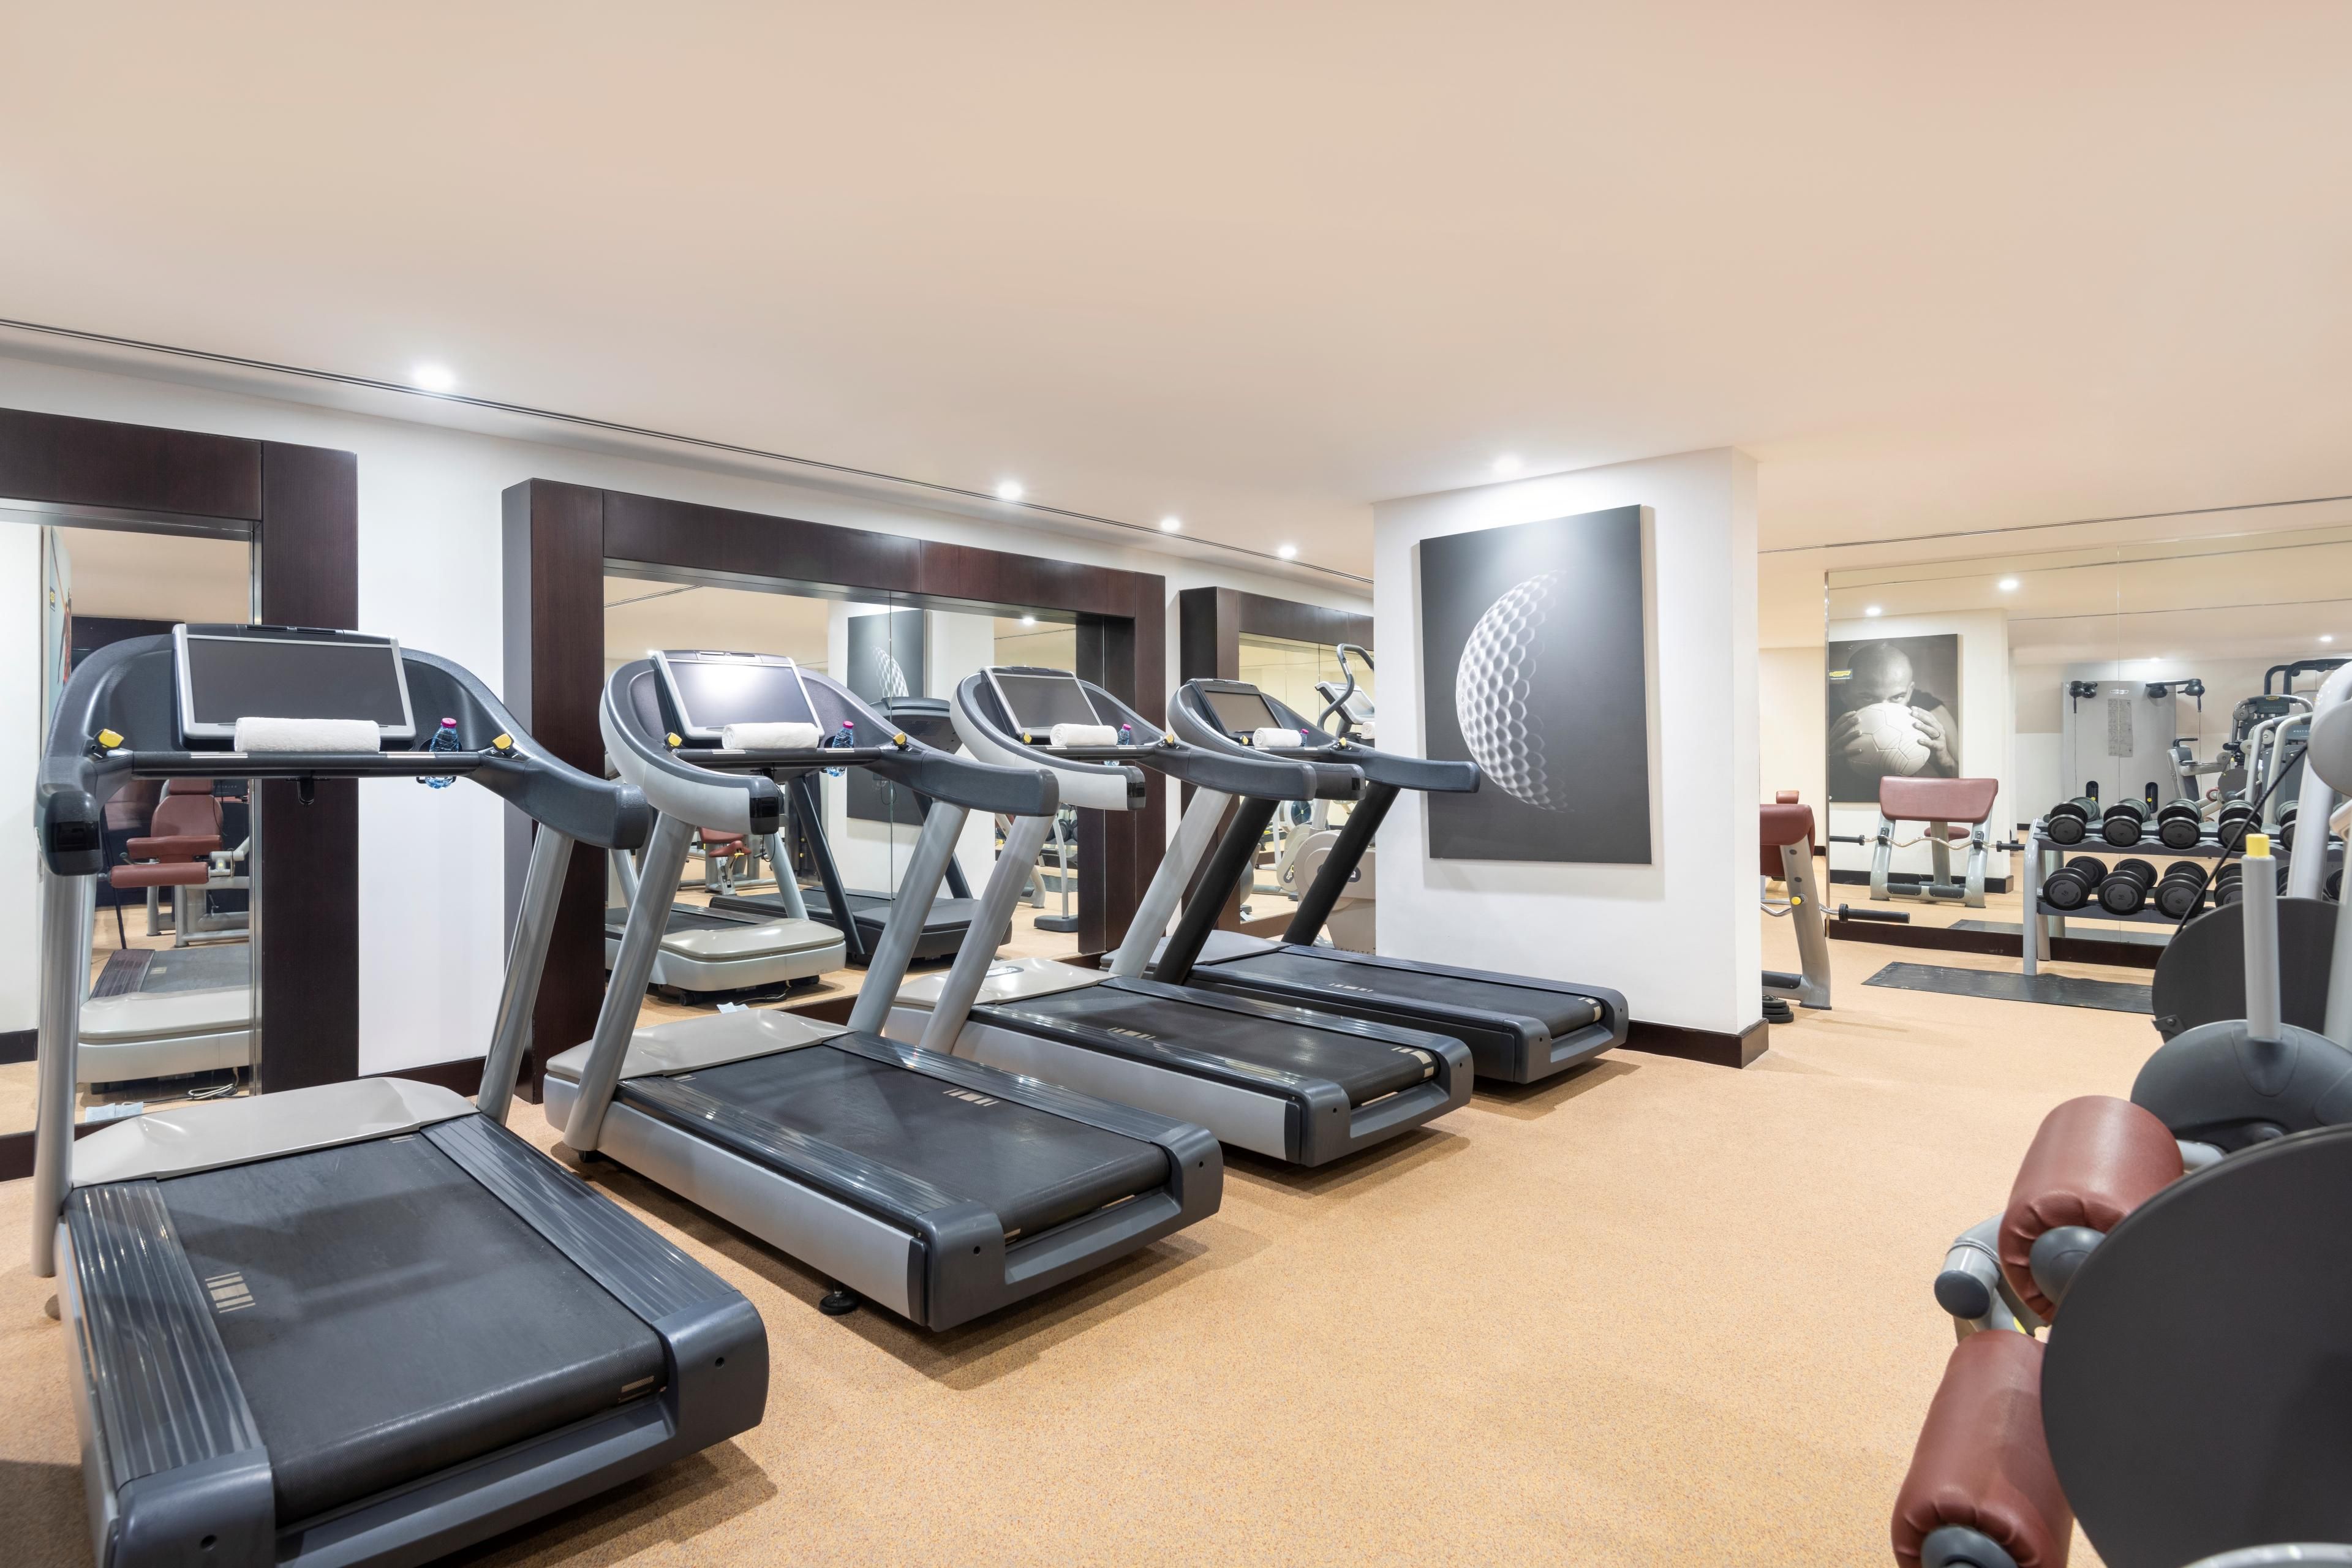 Recharge and get fit in our fully equipped fitness center